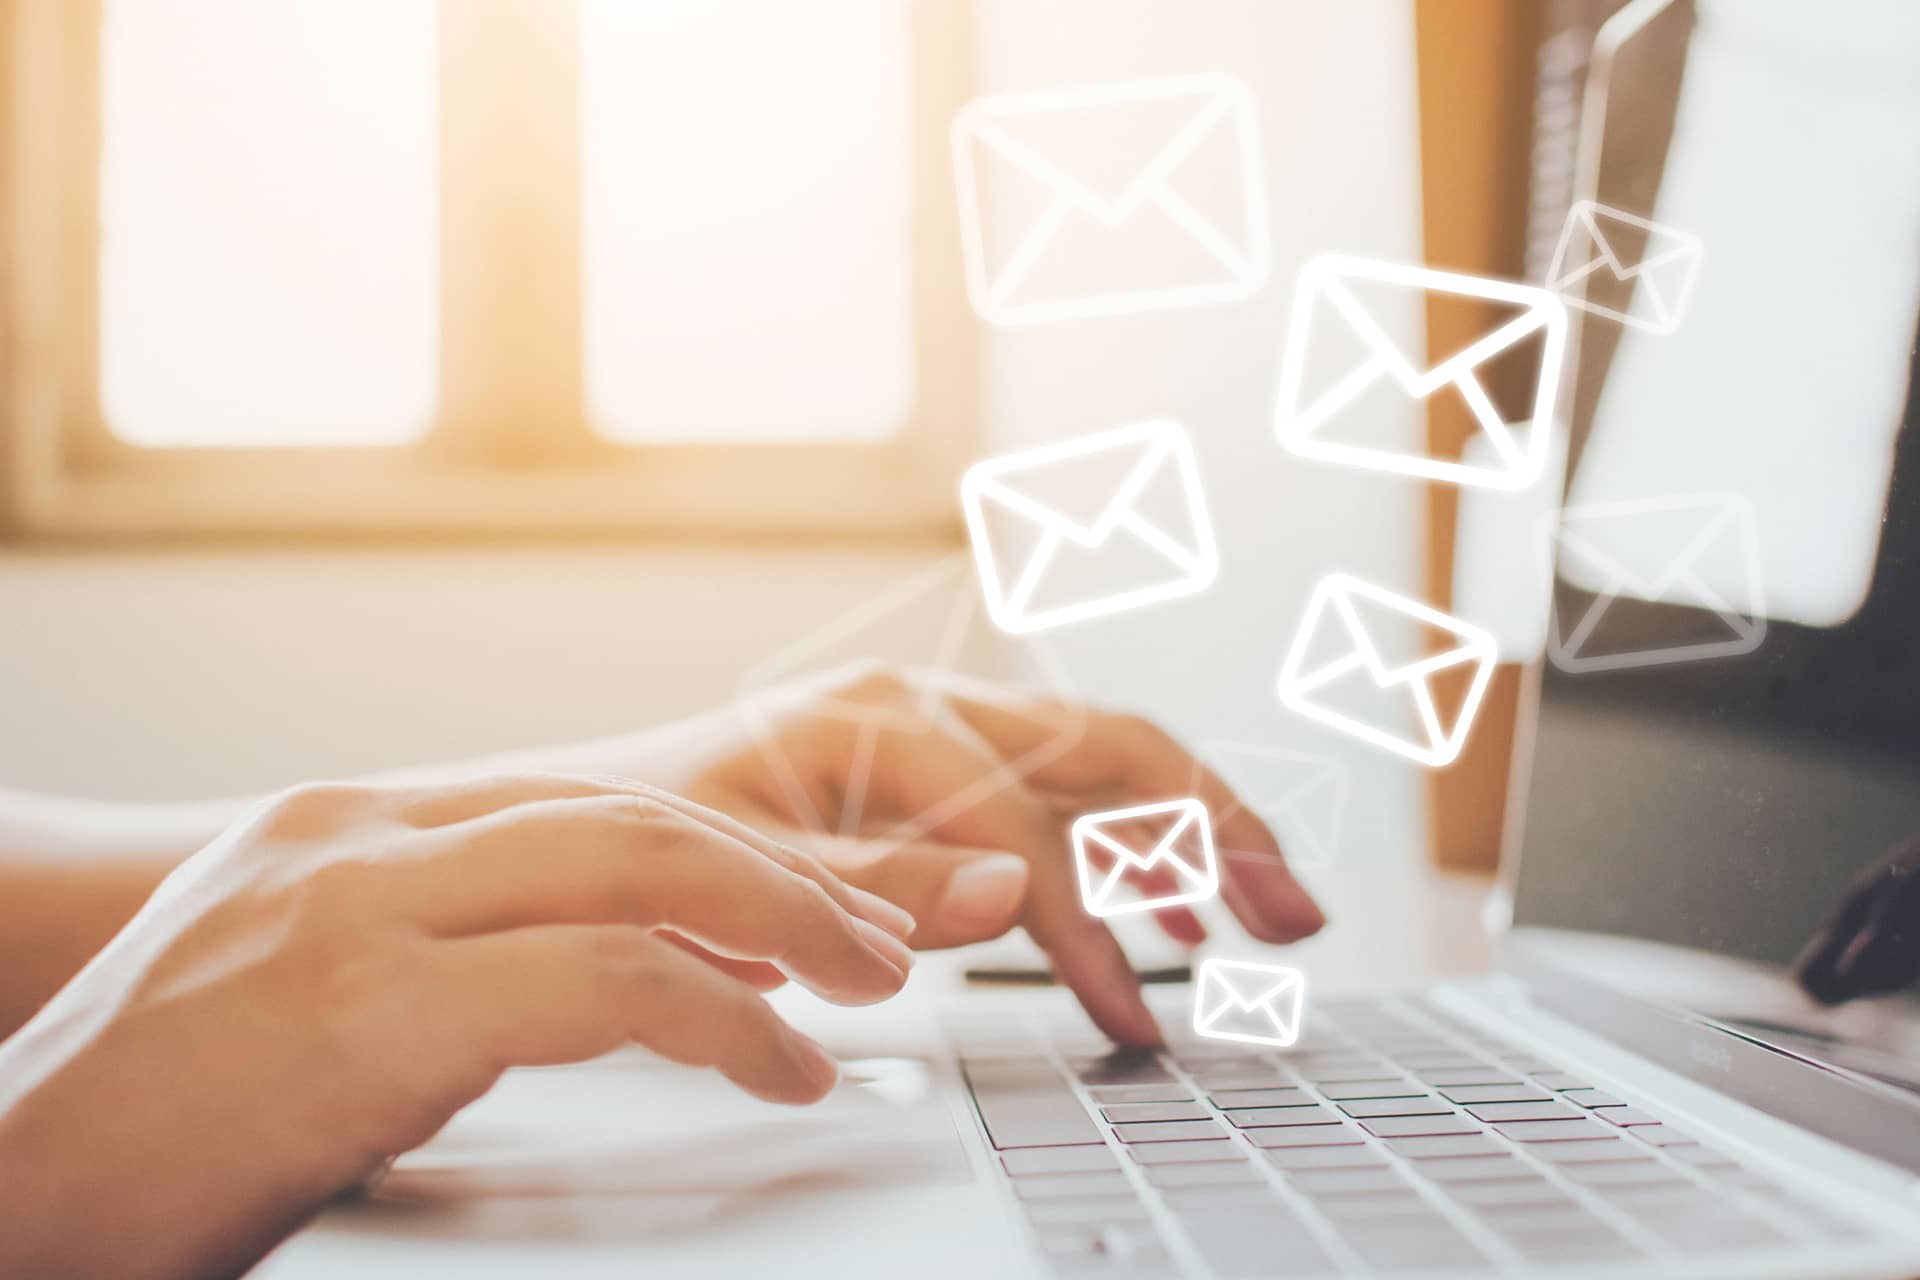 Rethinking email marketing. Sales emails are dead